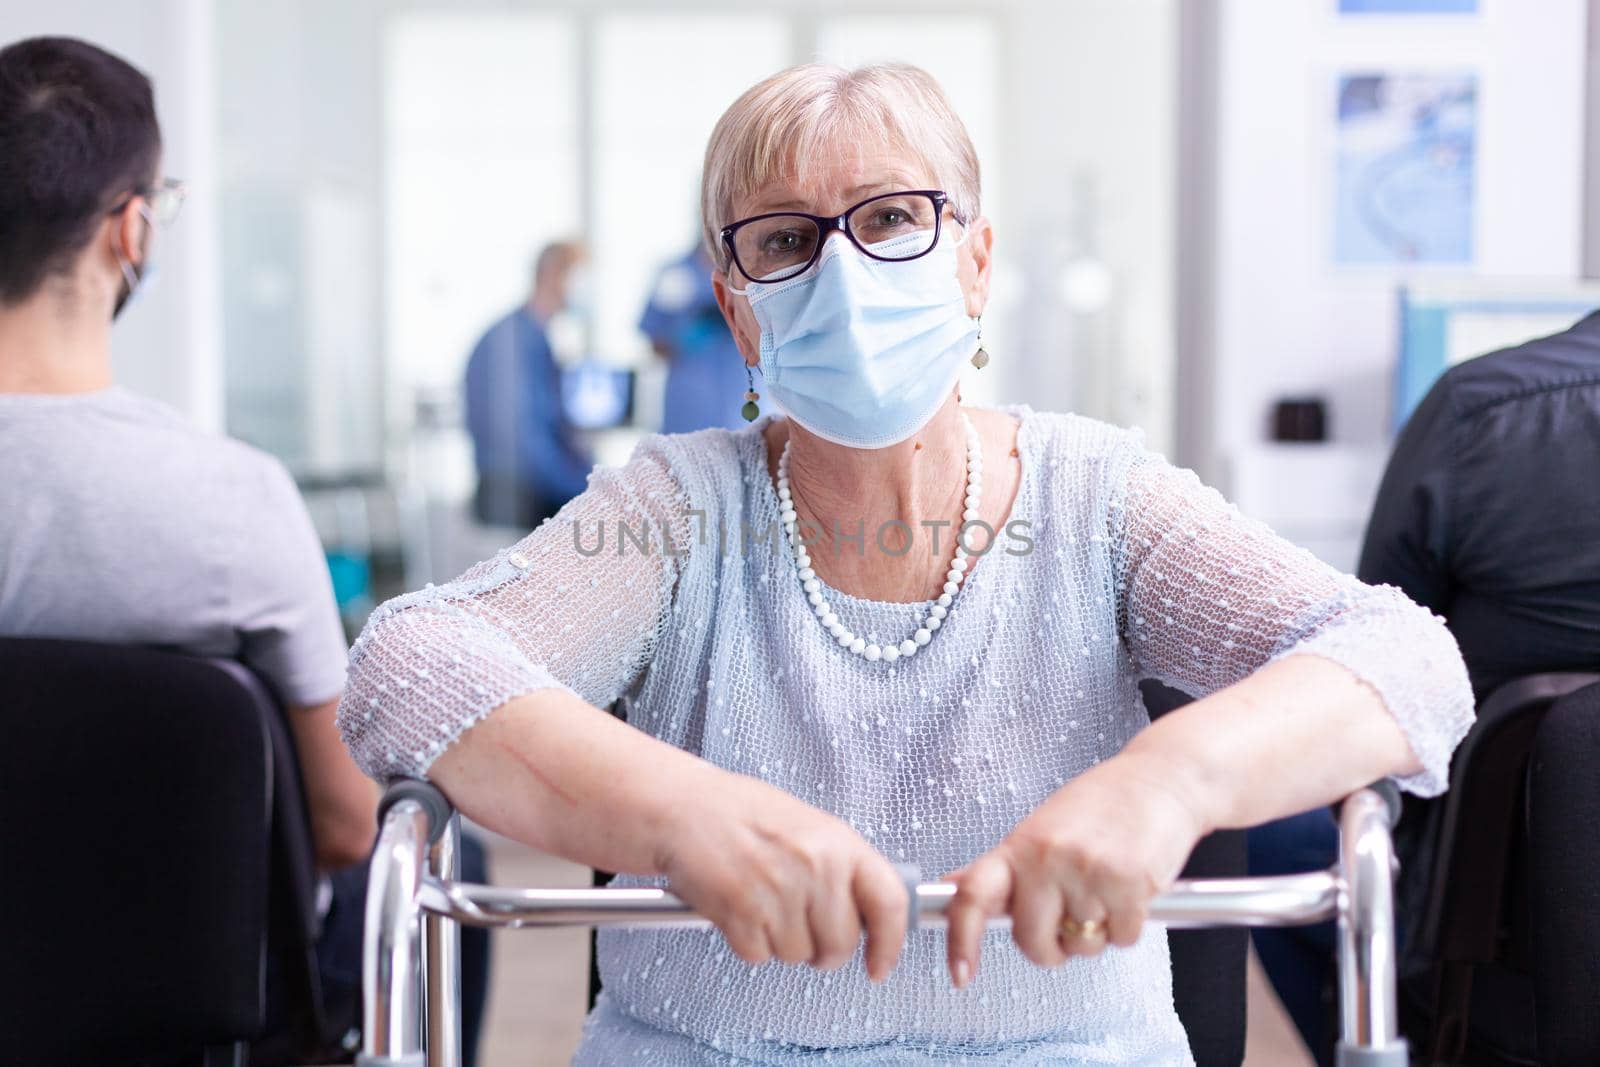 Handicapped senior woman with walking frame sitting down on chair in hospital waiting room wearing face mask against coronavirus. during global pandemic.